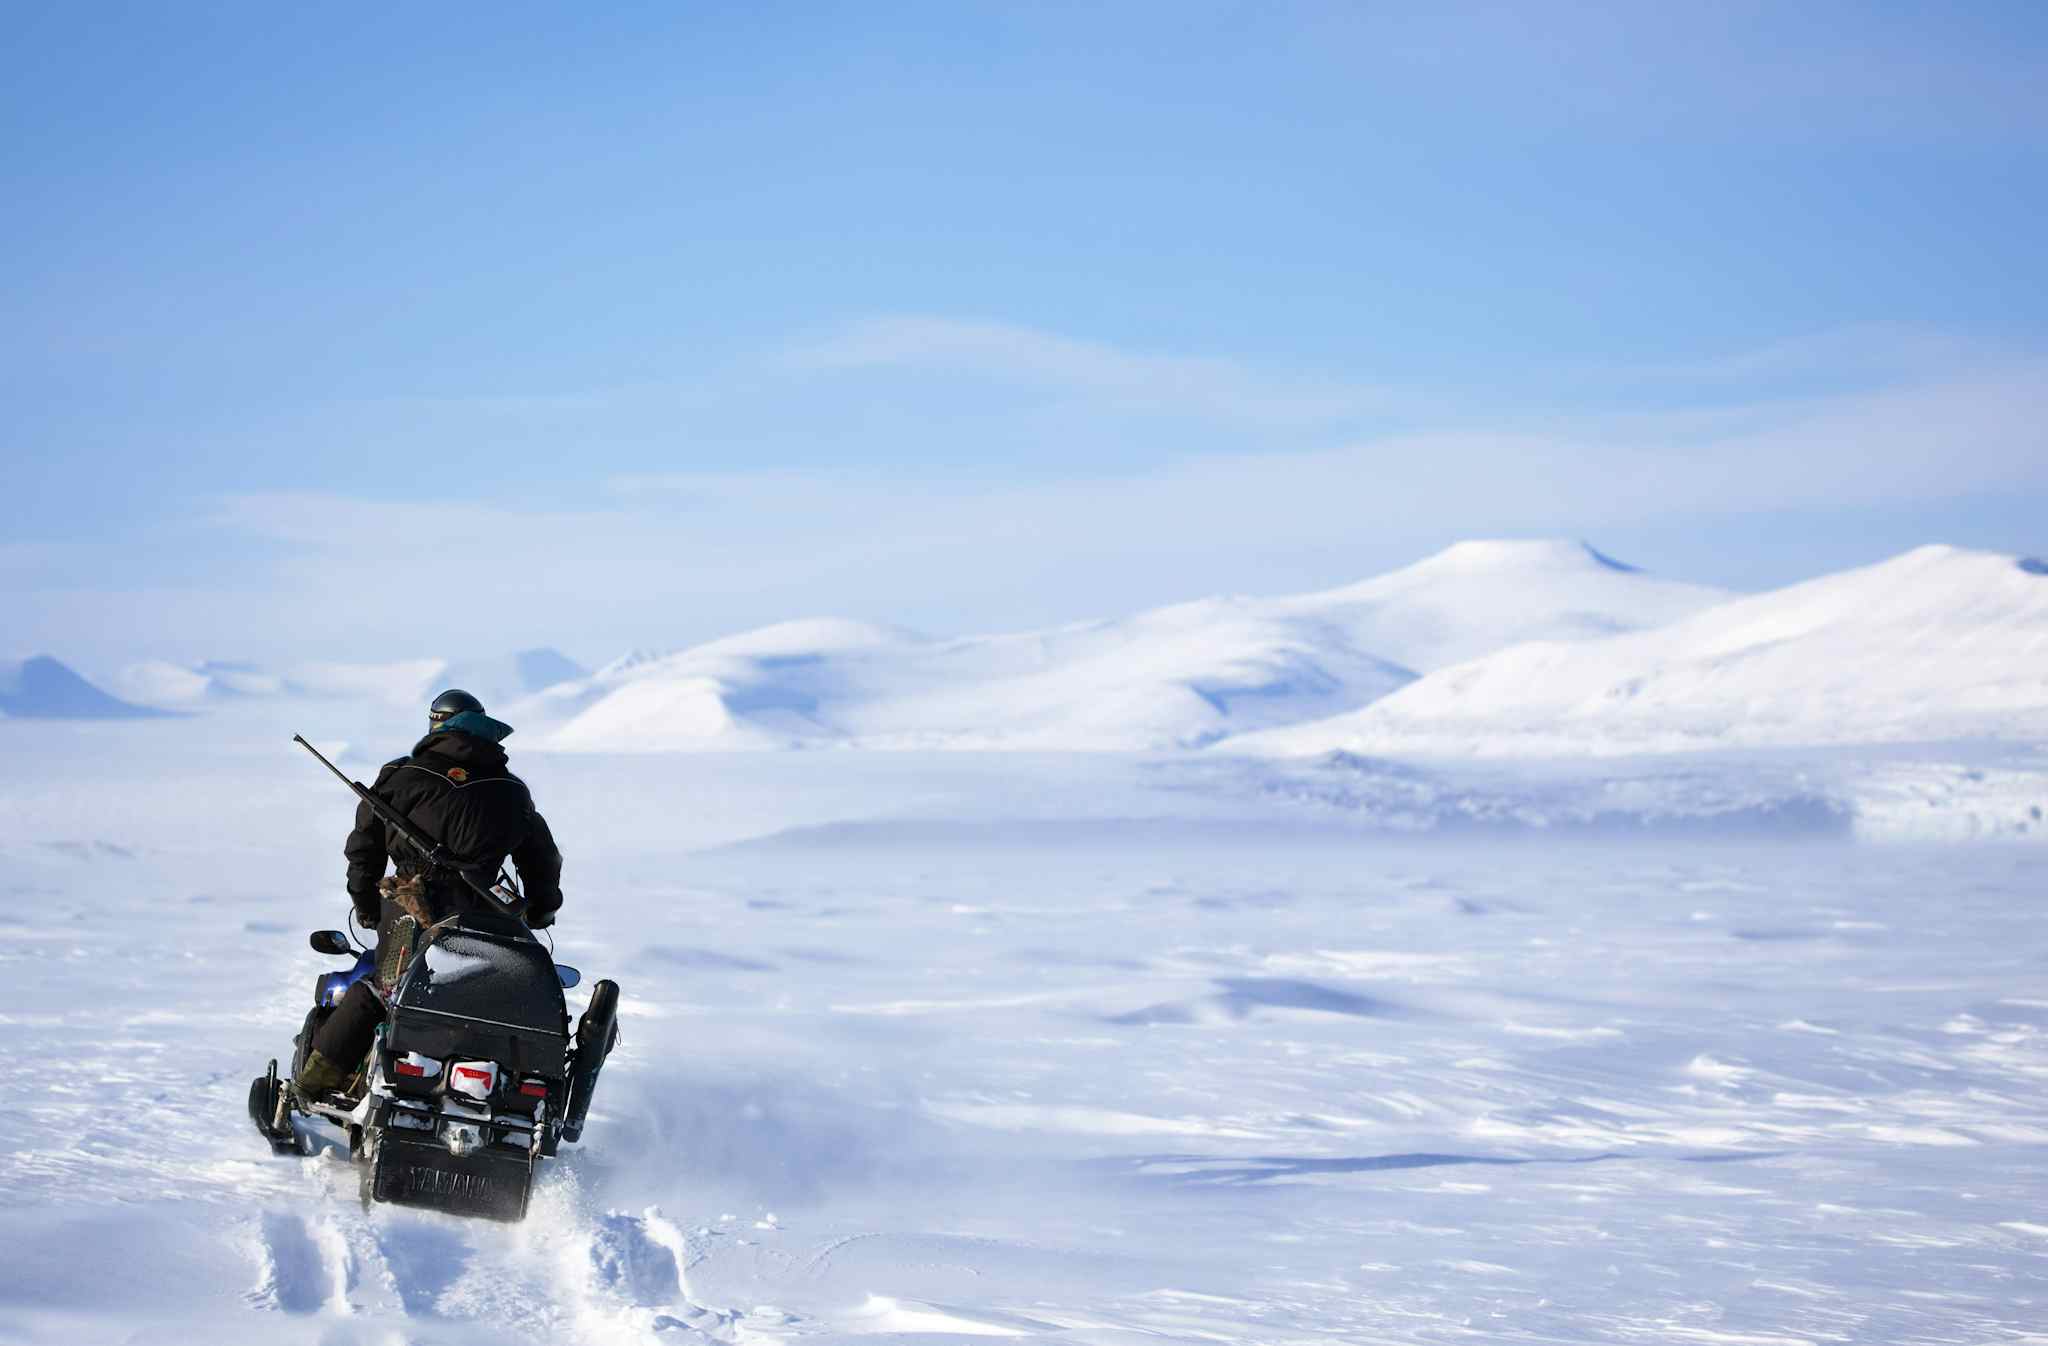 Snowmobiling in Svalbard, Norway. Photo: Host/Svalbard Wildlife Expeditions